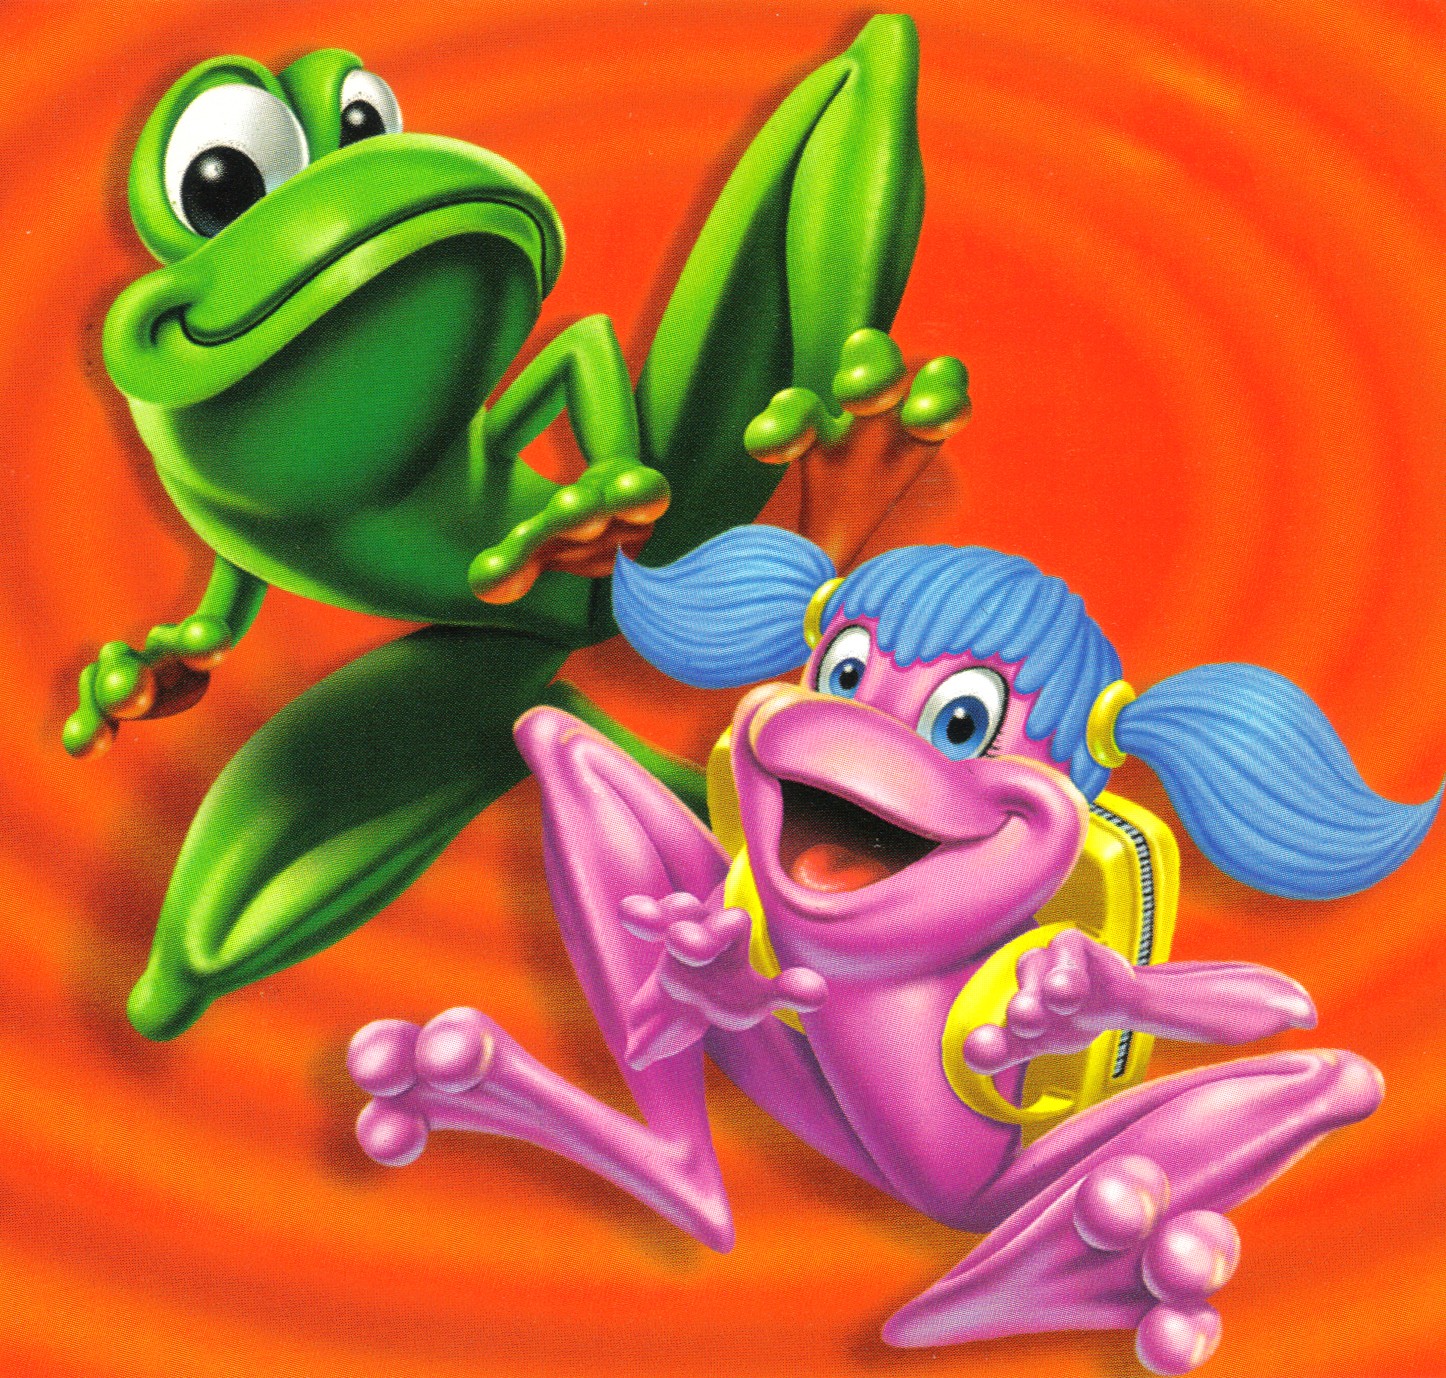 frogger 2 game work on ps2